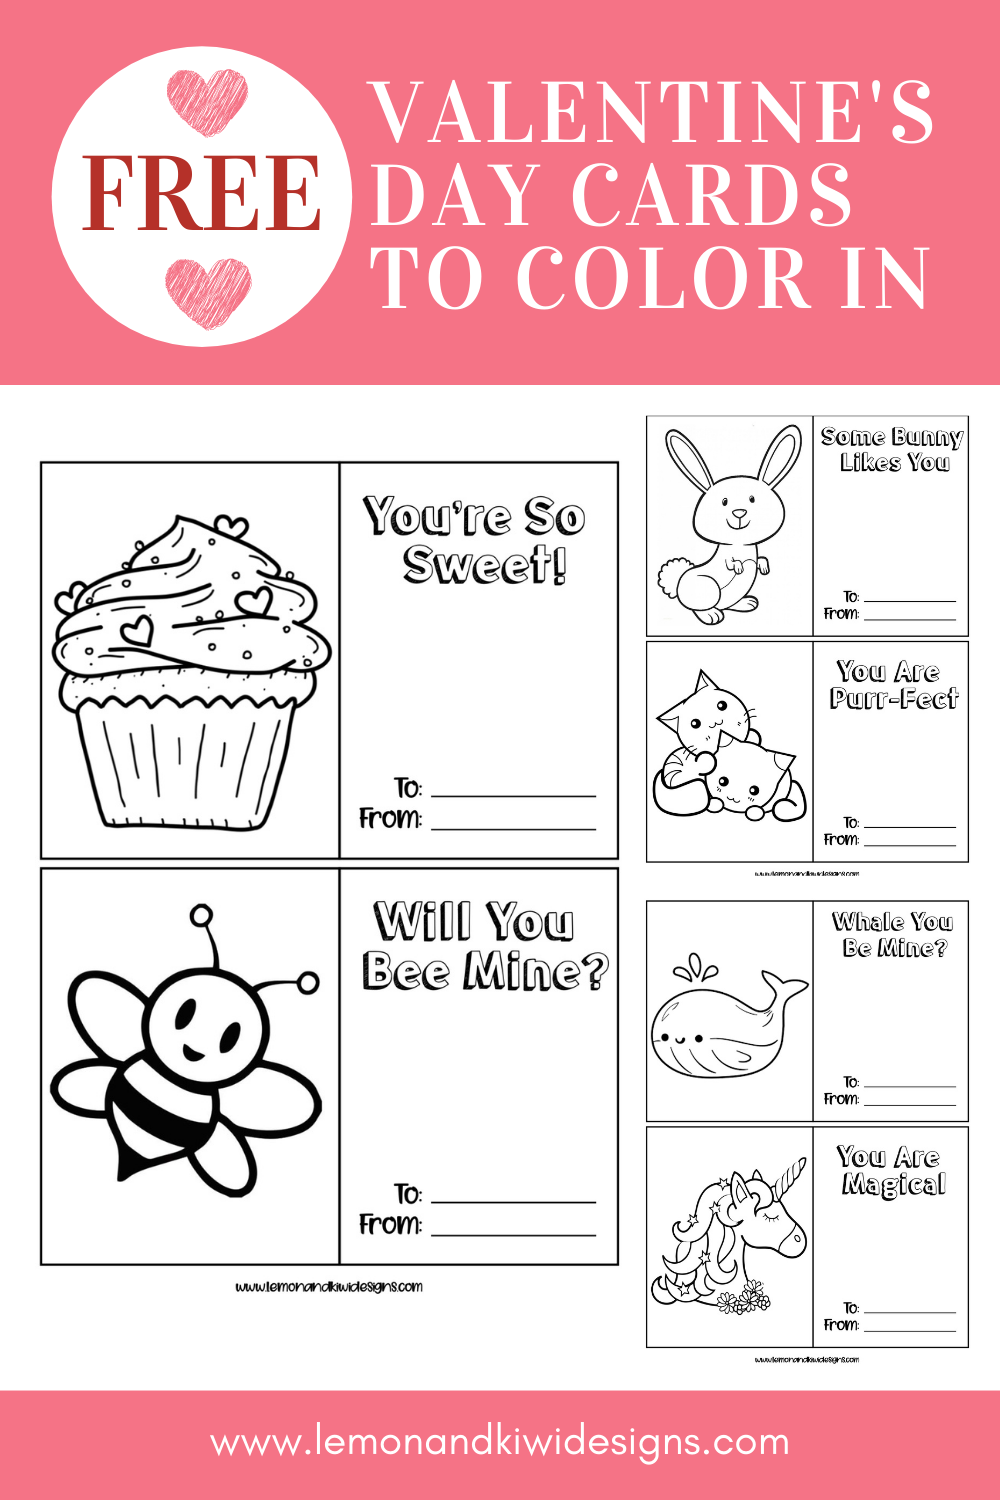 Free Valentine's Day Cards to Color In — Lemon & Kiwi Designs